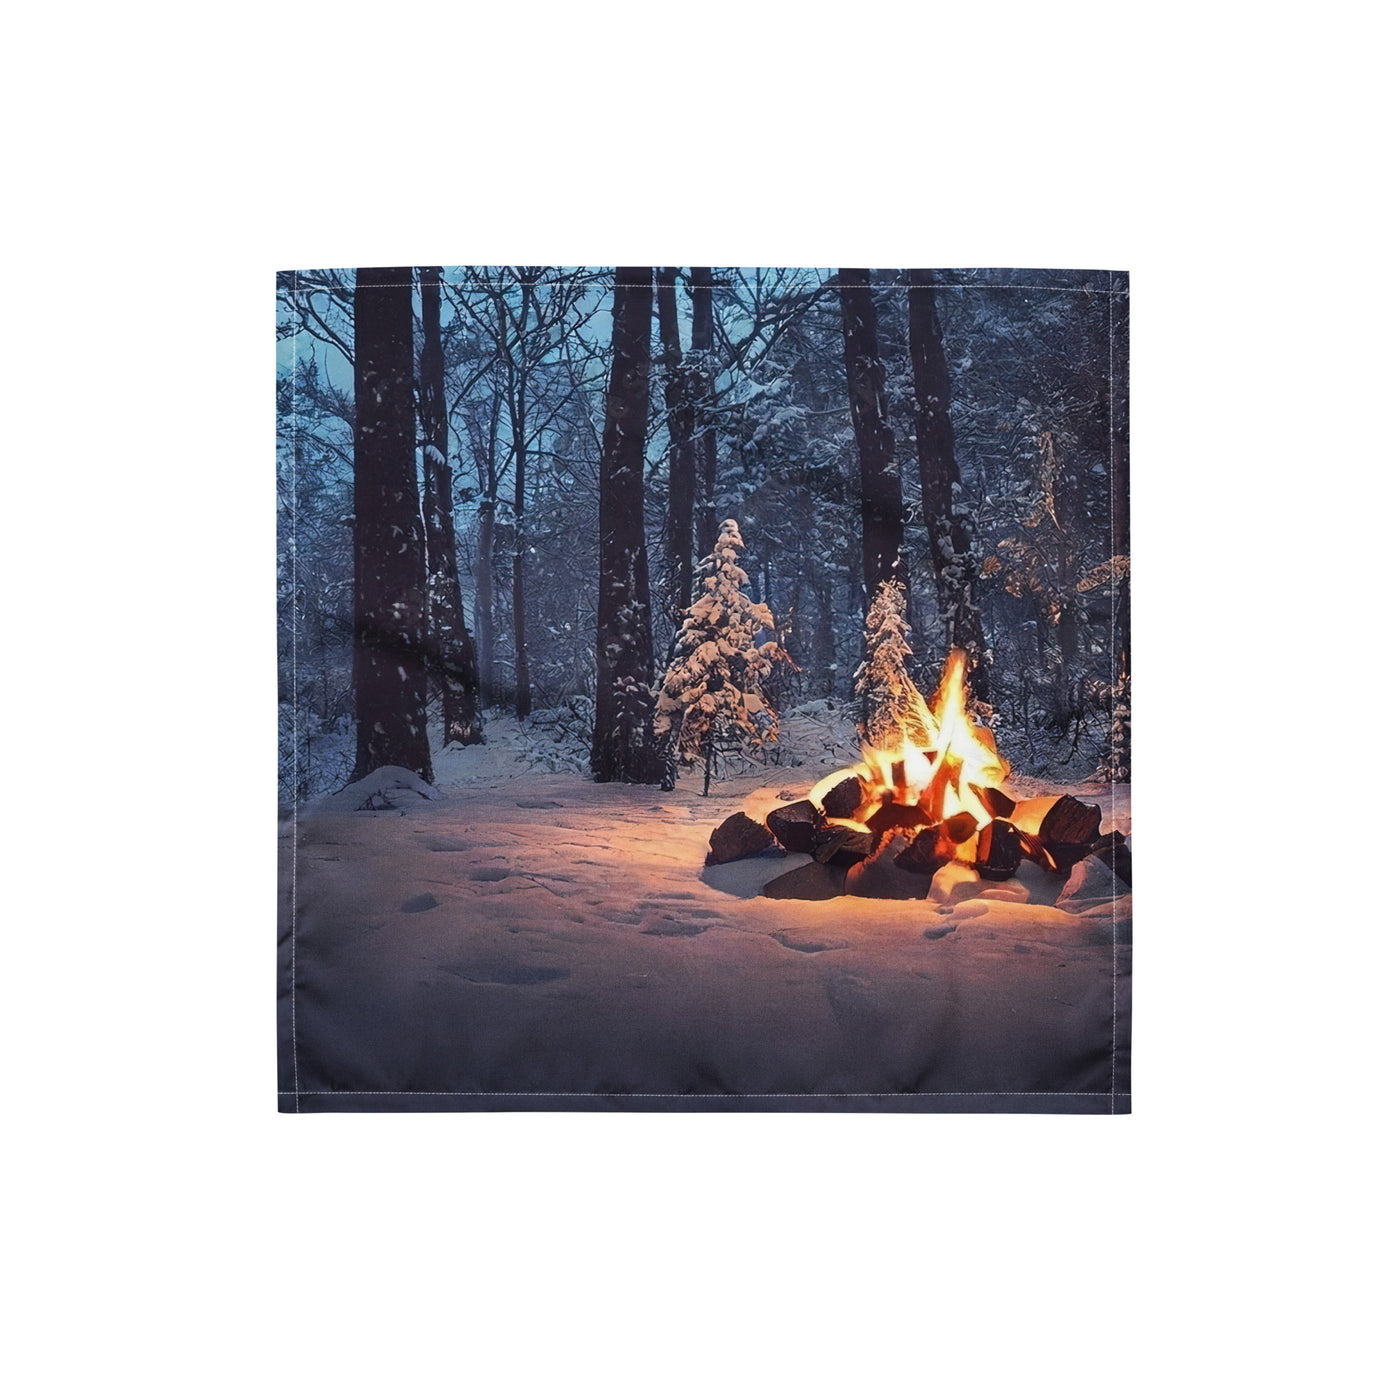 Lagerfeuer im Winter - Camping Foto - Bandana (All-Over Print) camping xxx S